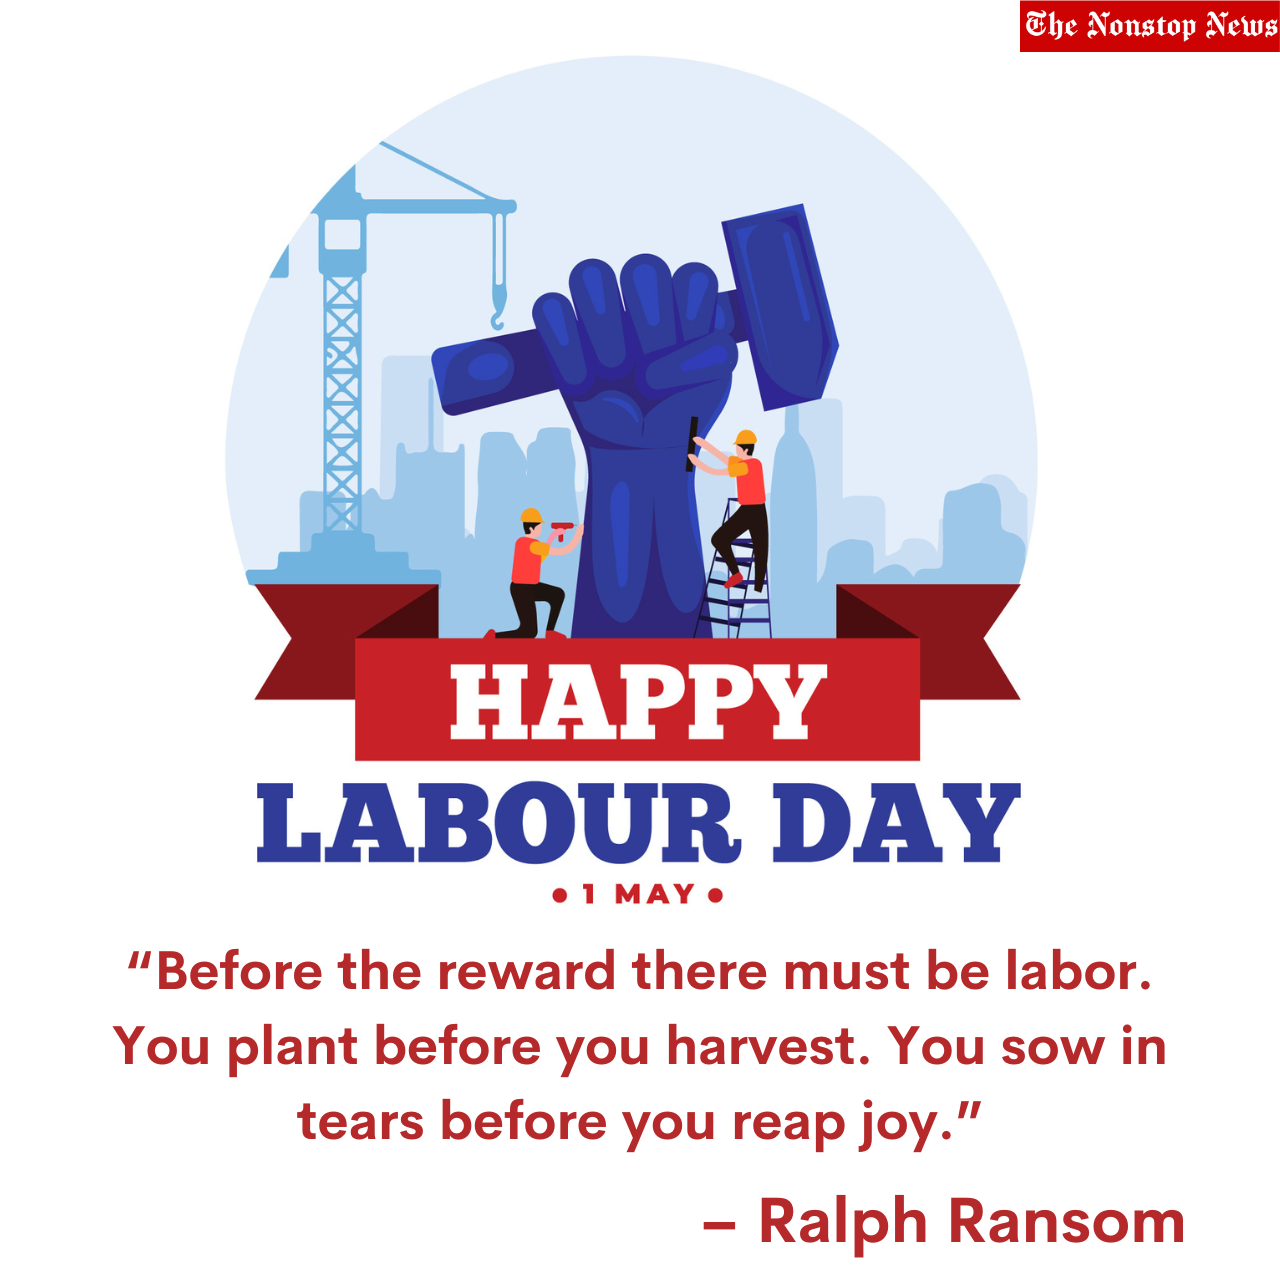 Labor Day 2022: Best Instagram Captions, Twitter Greetings, Facebook Quotes, WhatsApp Stickers, Sayings, To Share